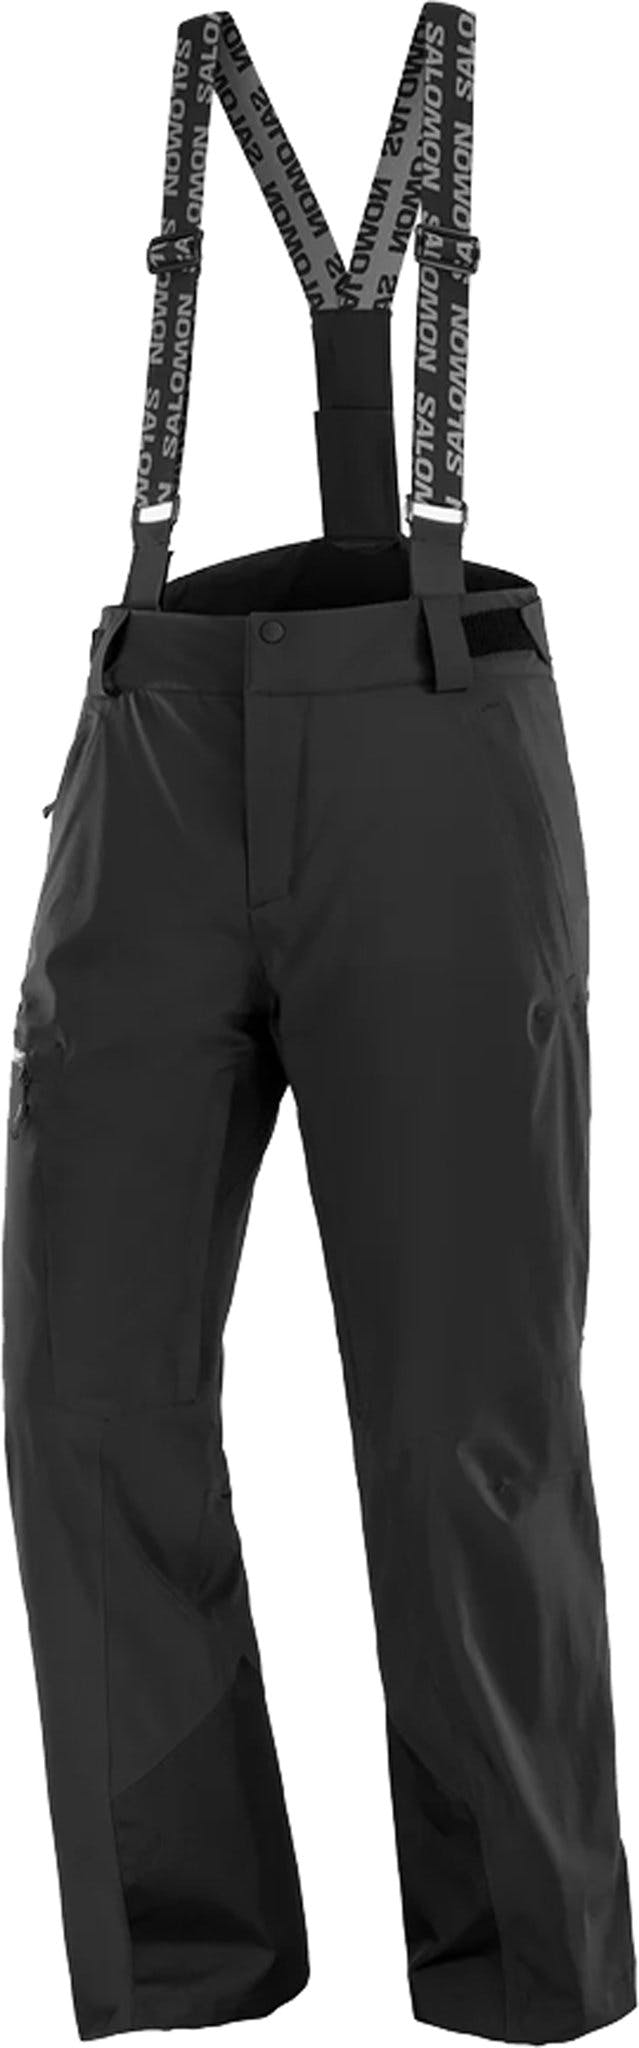 Product image for Brilliant Insulated Pant - Men's